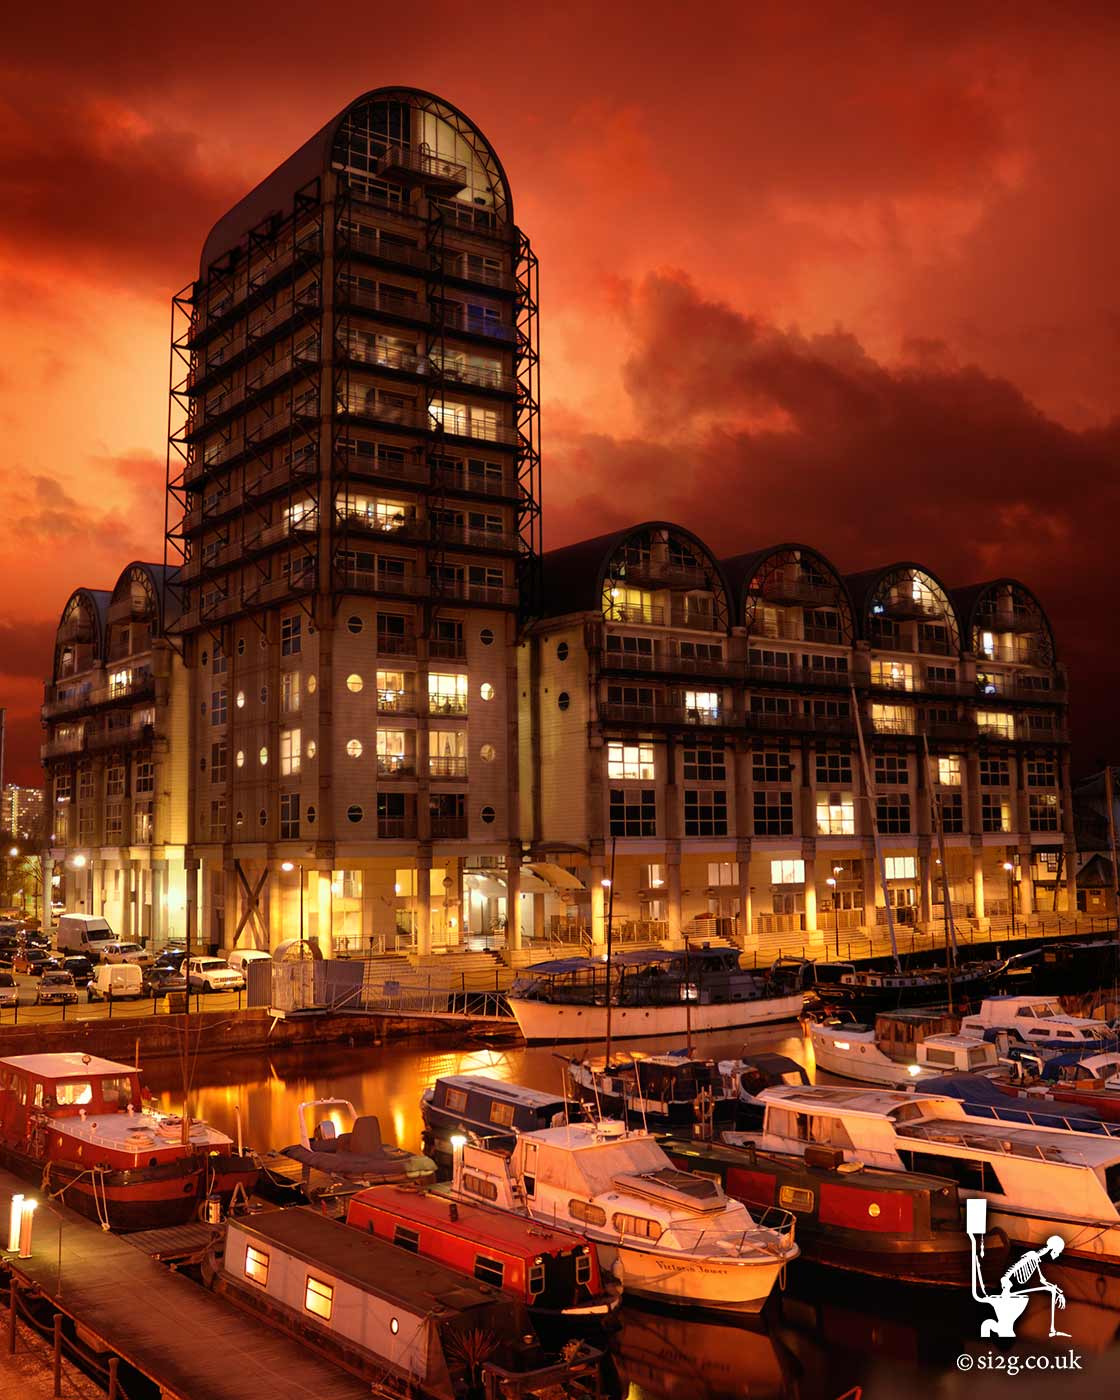 Baltic Quay - This HDR photo is a composite of around 8 or 9 photos taken at various times during the day and evening.  The effect is this powerful and dramatic image of the Baltic Quay apartments in South London and their view of the marina.